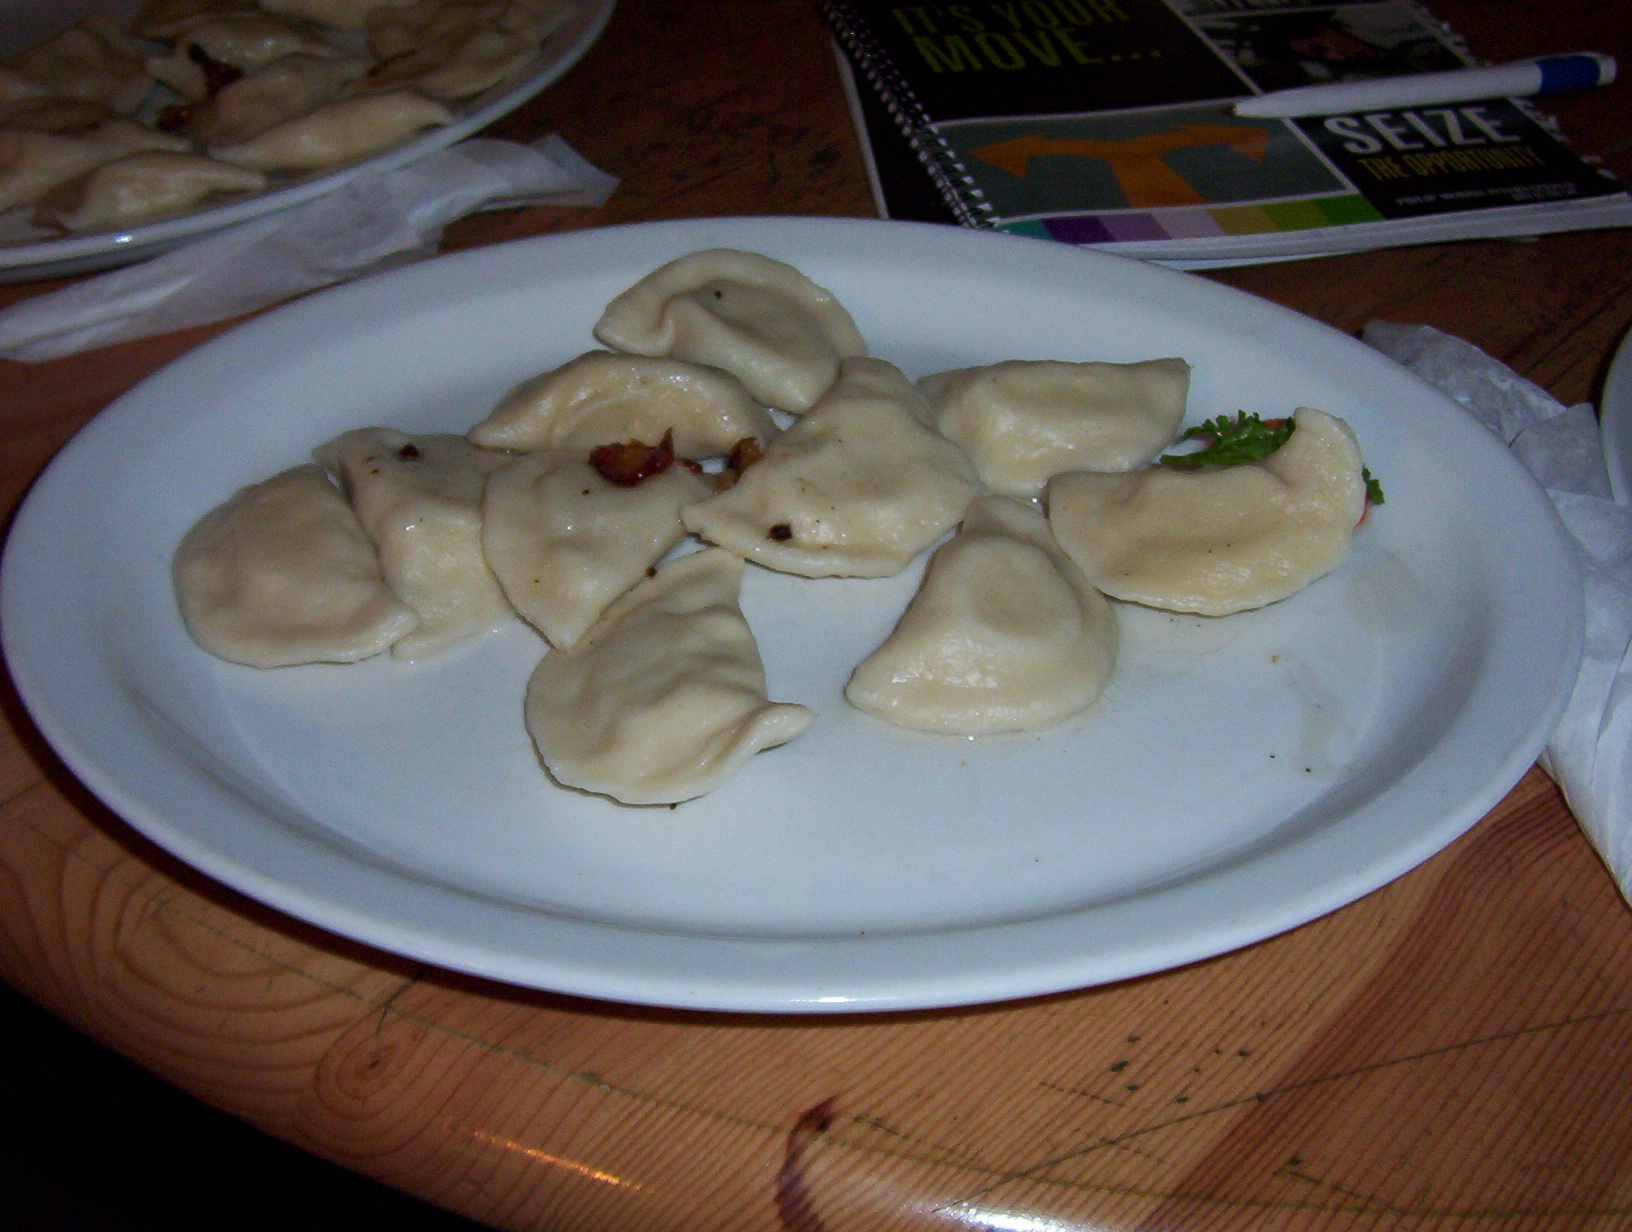 dumplings of food are on a white plate